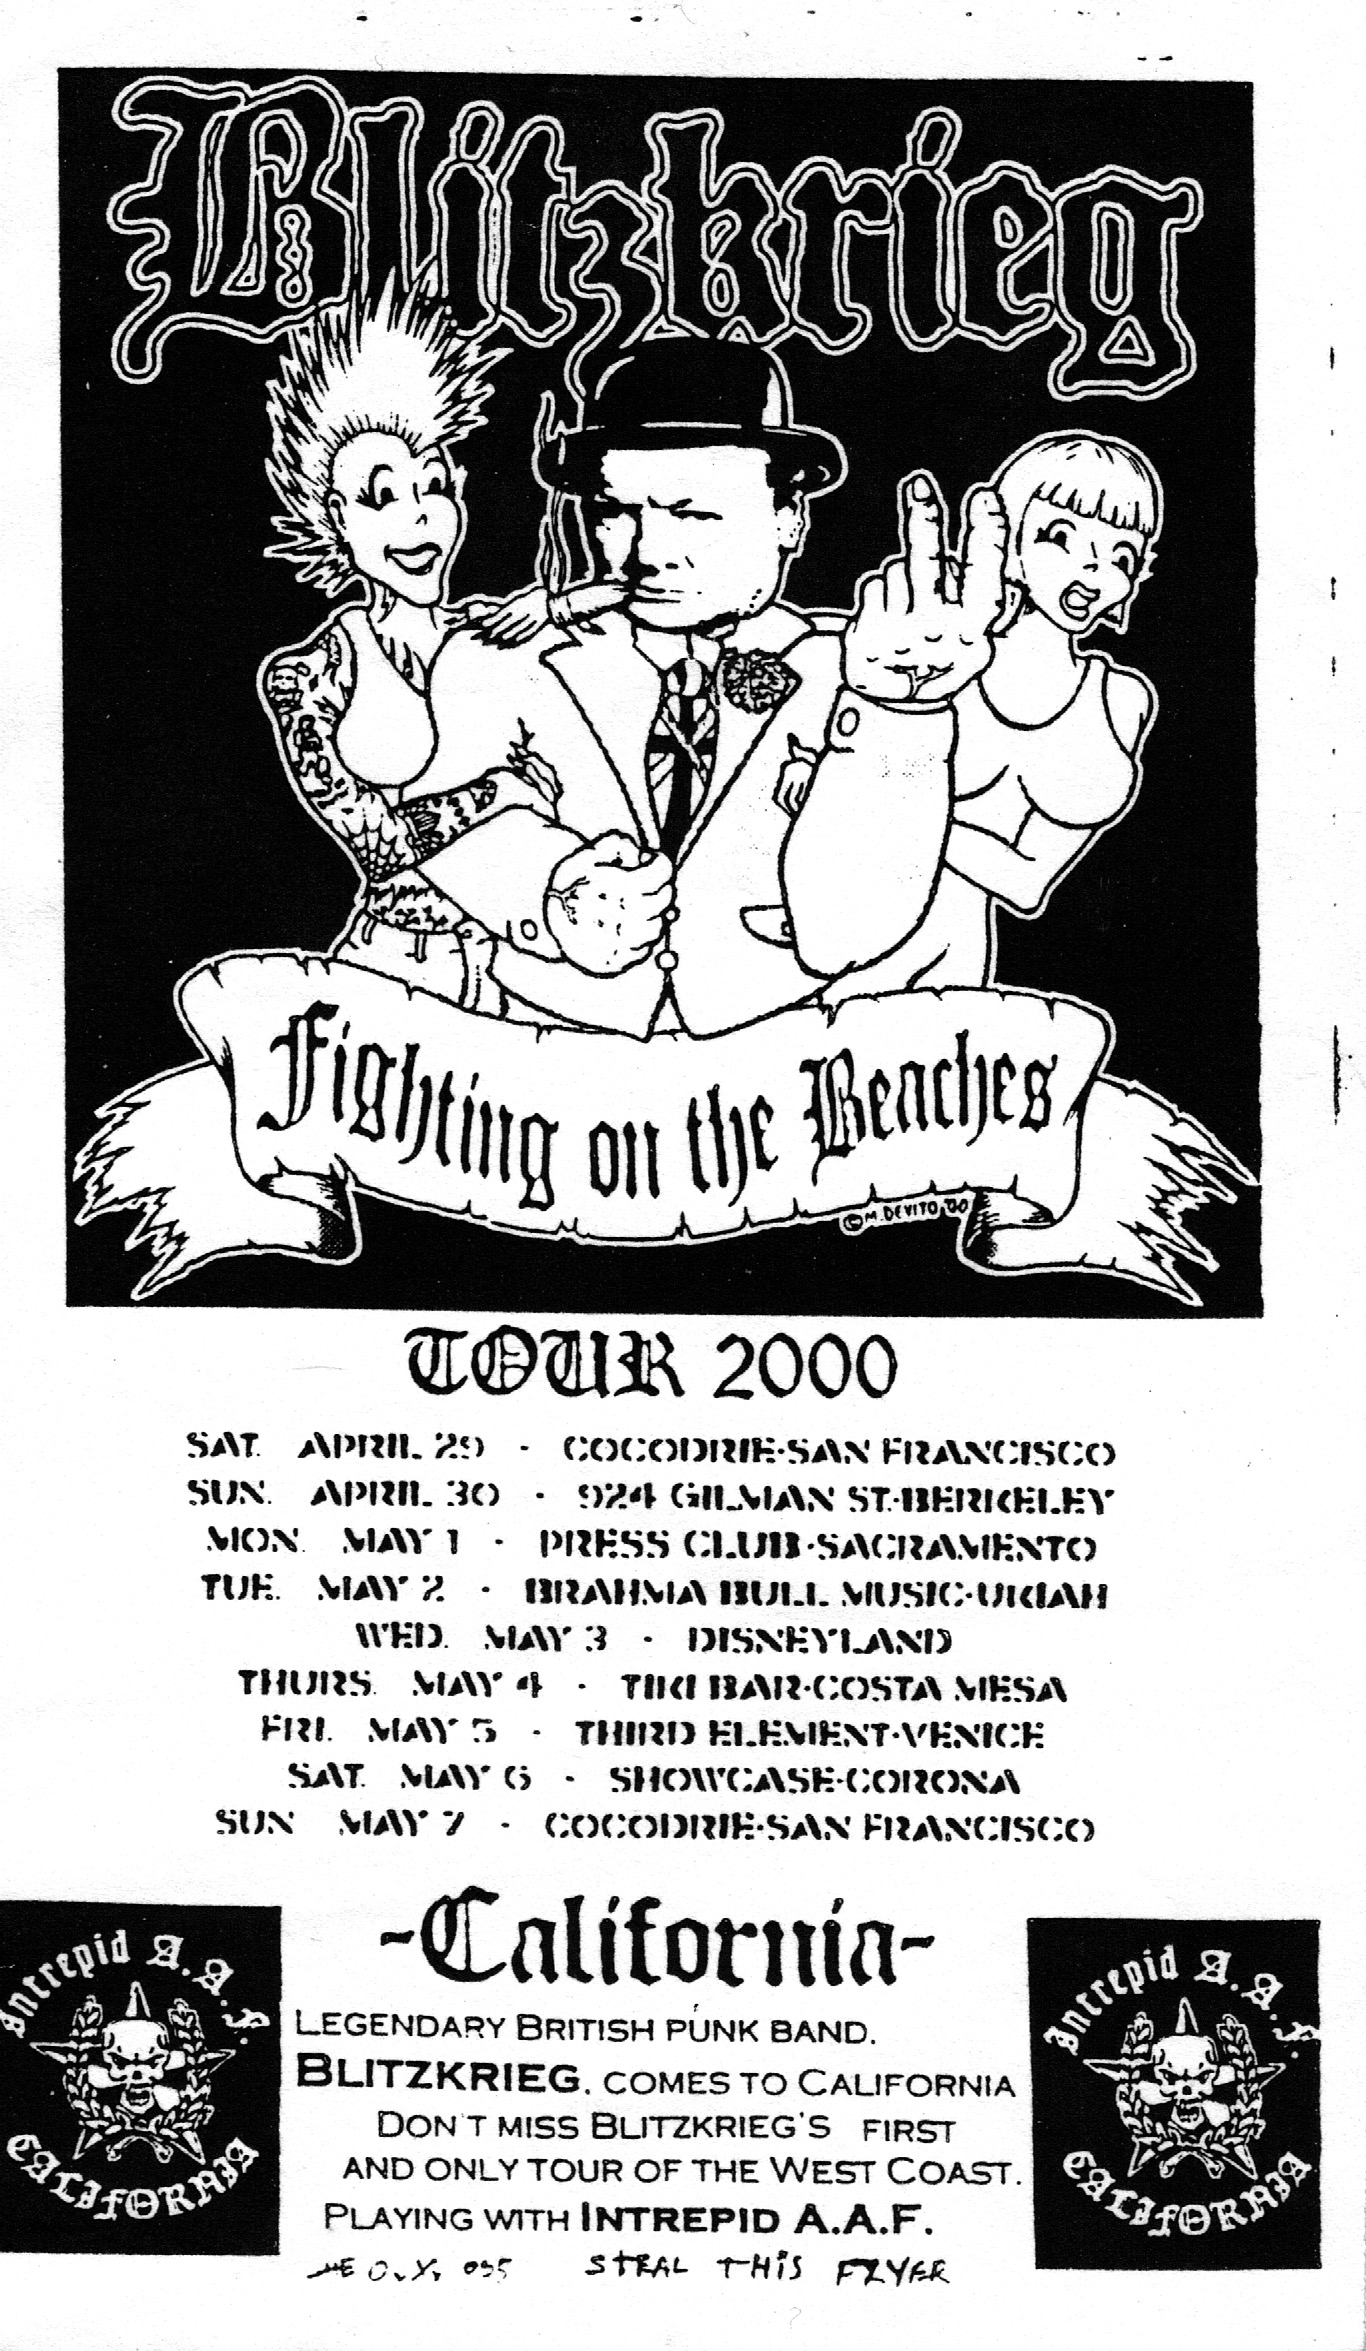 First ever US tour - playing with Blitkrieg 2000